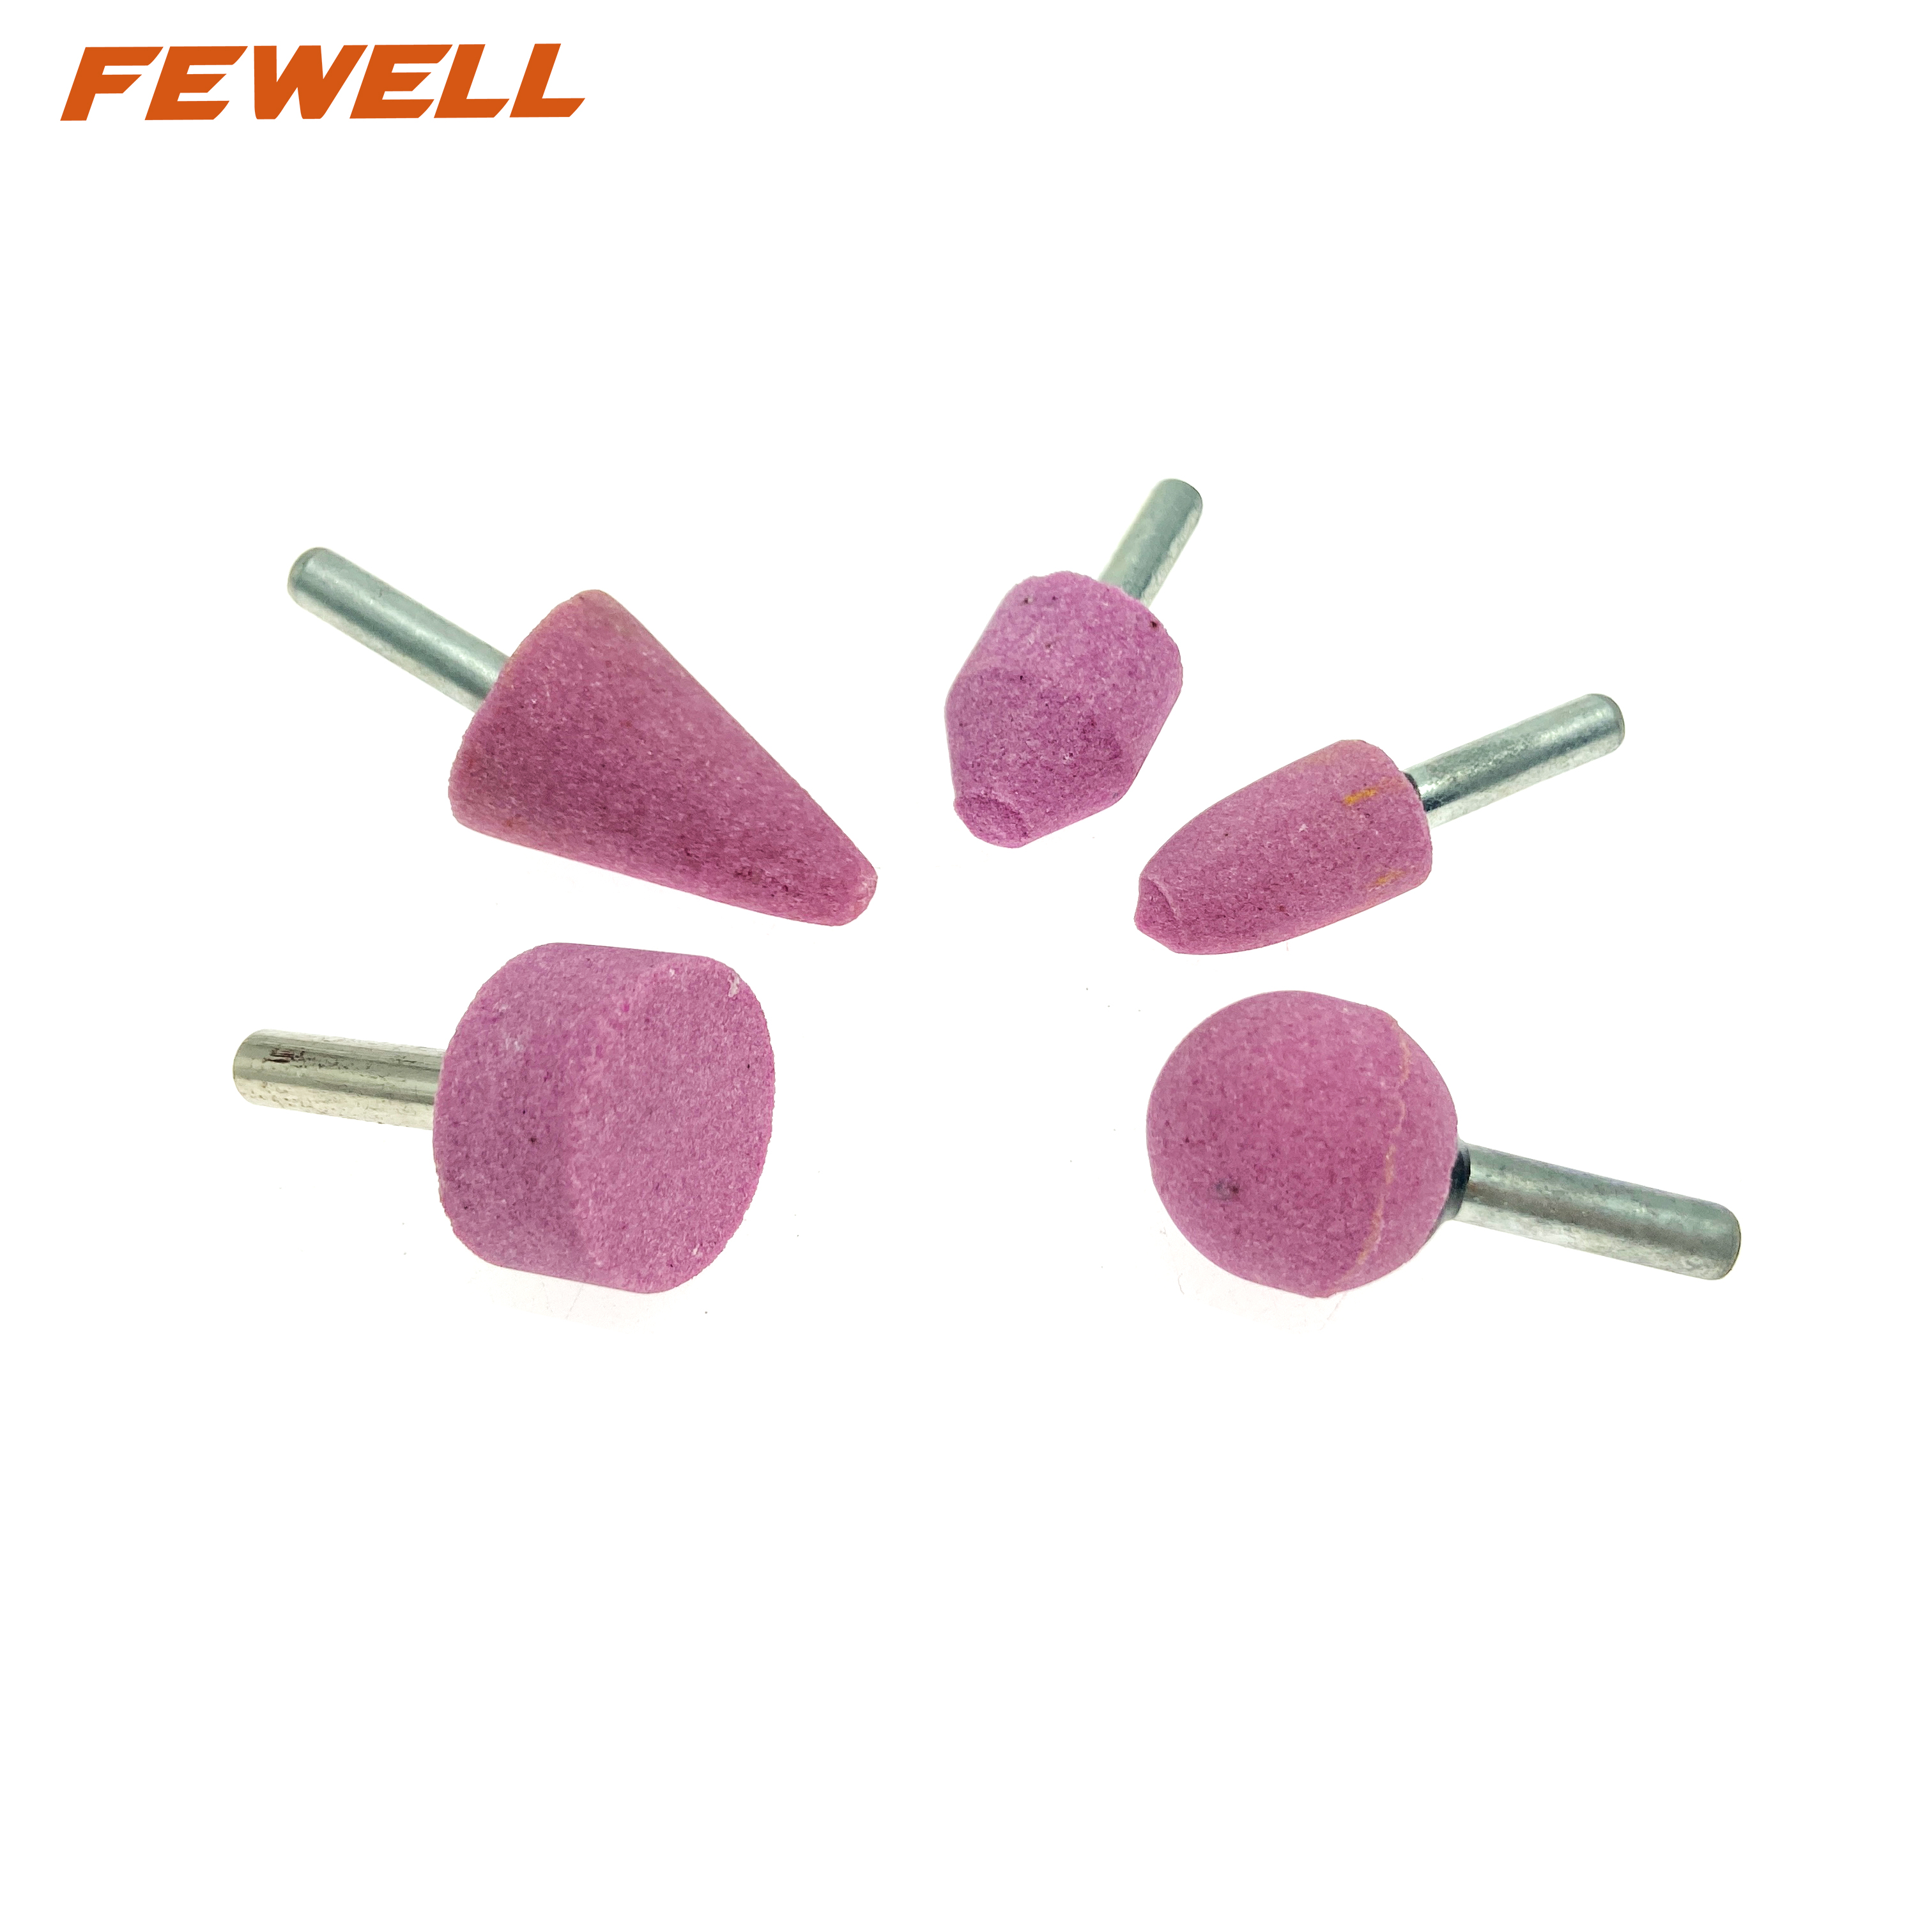 High quality 5PCS 1/4" Shank grinding head Mounted Stones set for polishing metal stainless steel